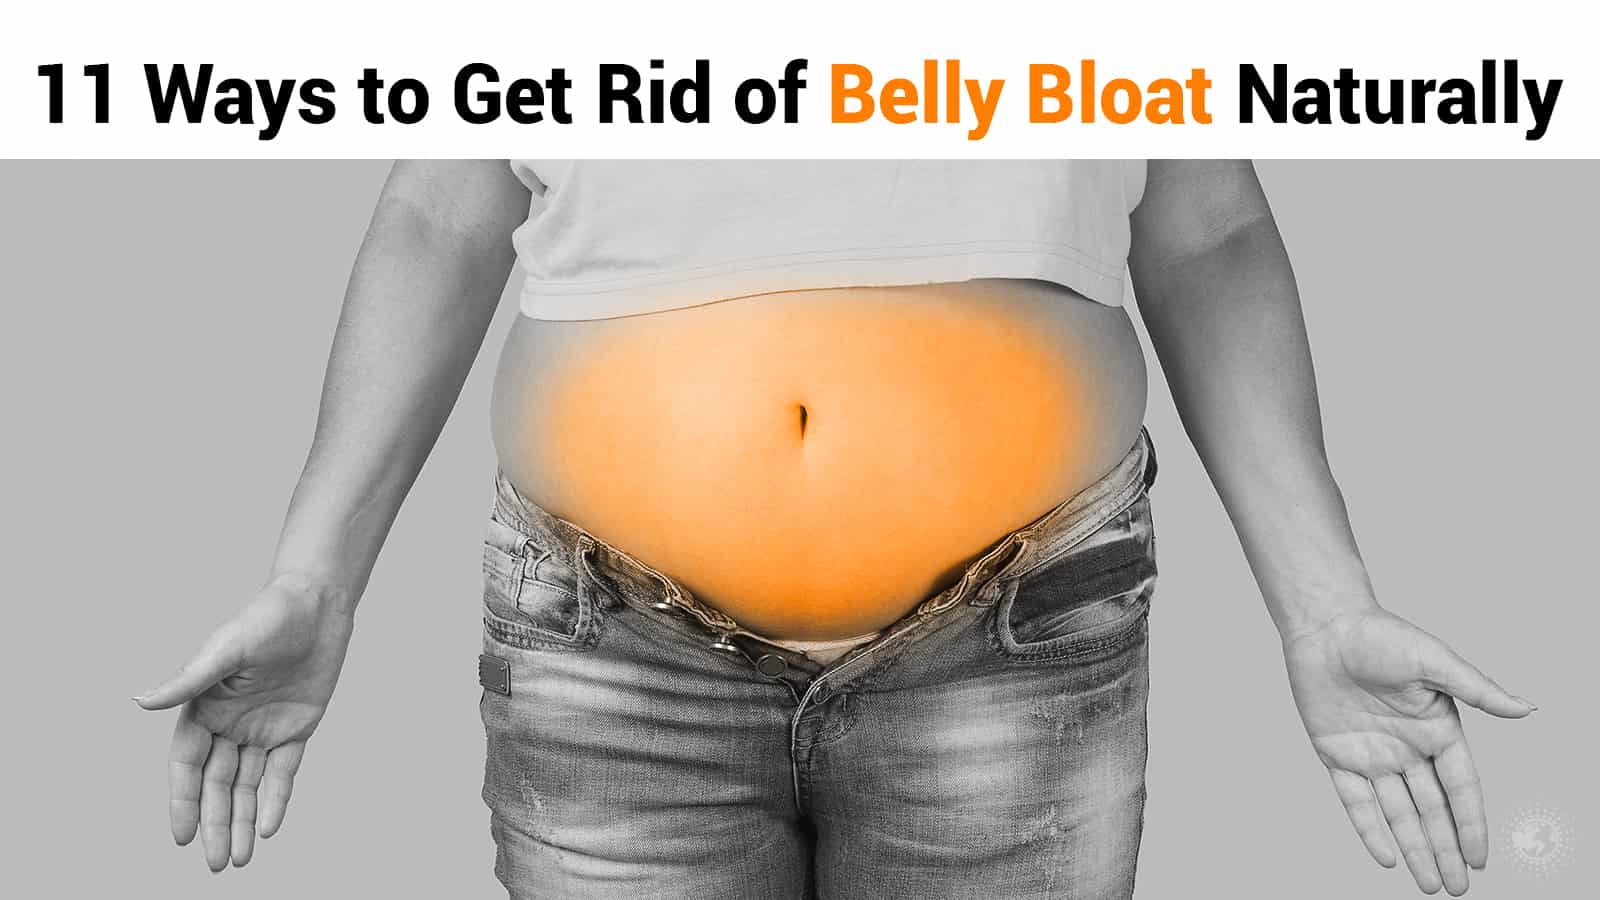 https://www.powerofpositivity.com/belly-bloat-heal-naturally/11-ways-to-get-rid-of-belly-bloat-naturally/